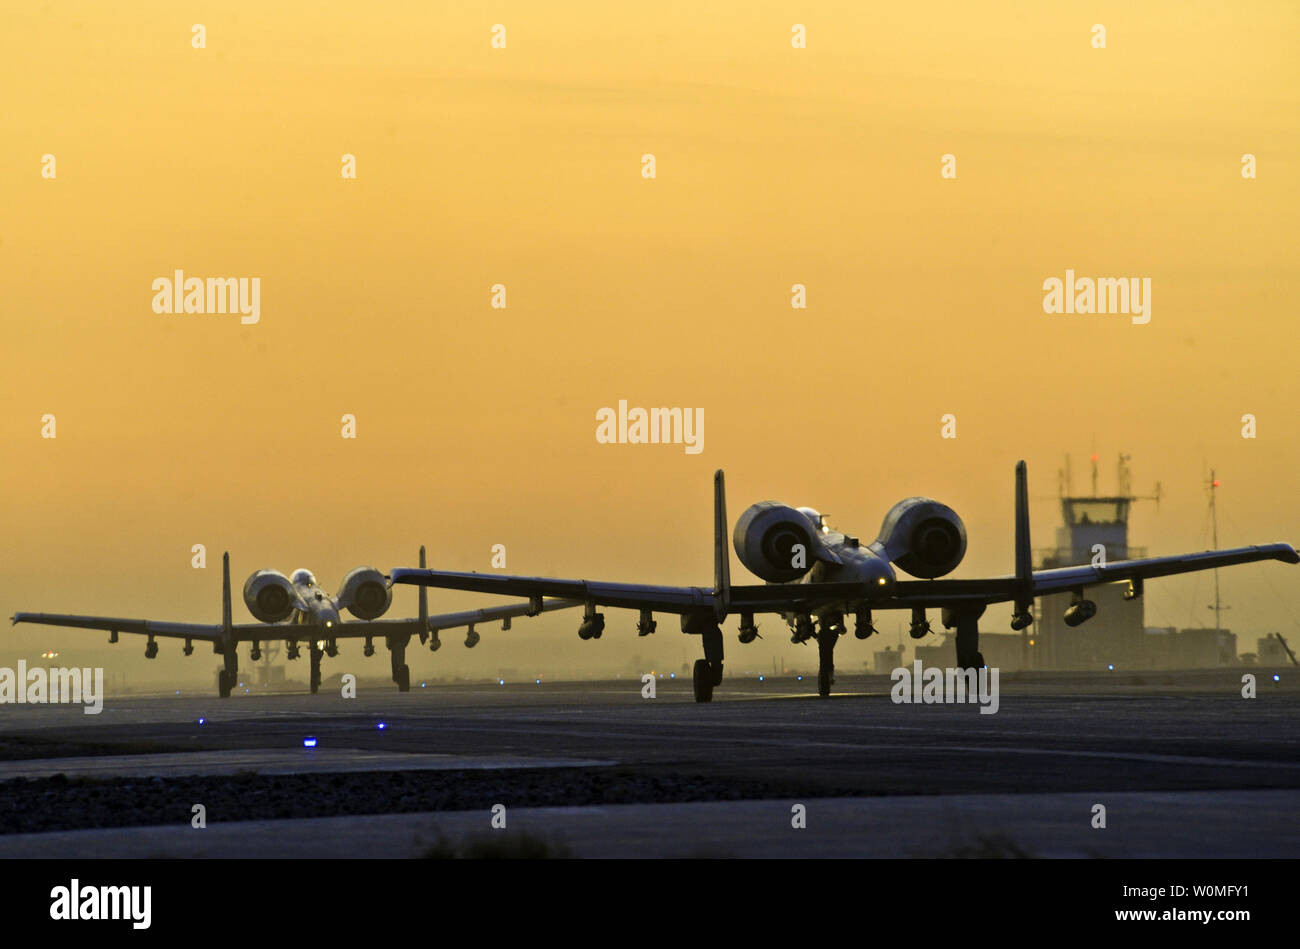 A pair of A-10C Thunderbolts from the 354th Expeditionary Fighter Squadron taxi down the runway at Kandahar Airfield, Afghanistan on December 27, 2009. UPI/Efren Lopez/U.S. Air Force Stock Photo